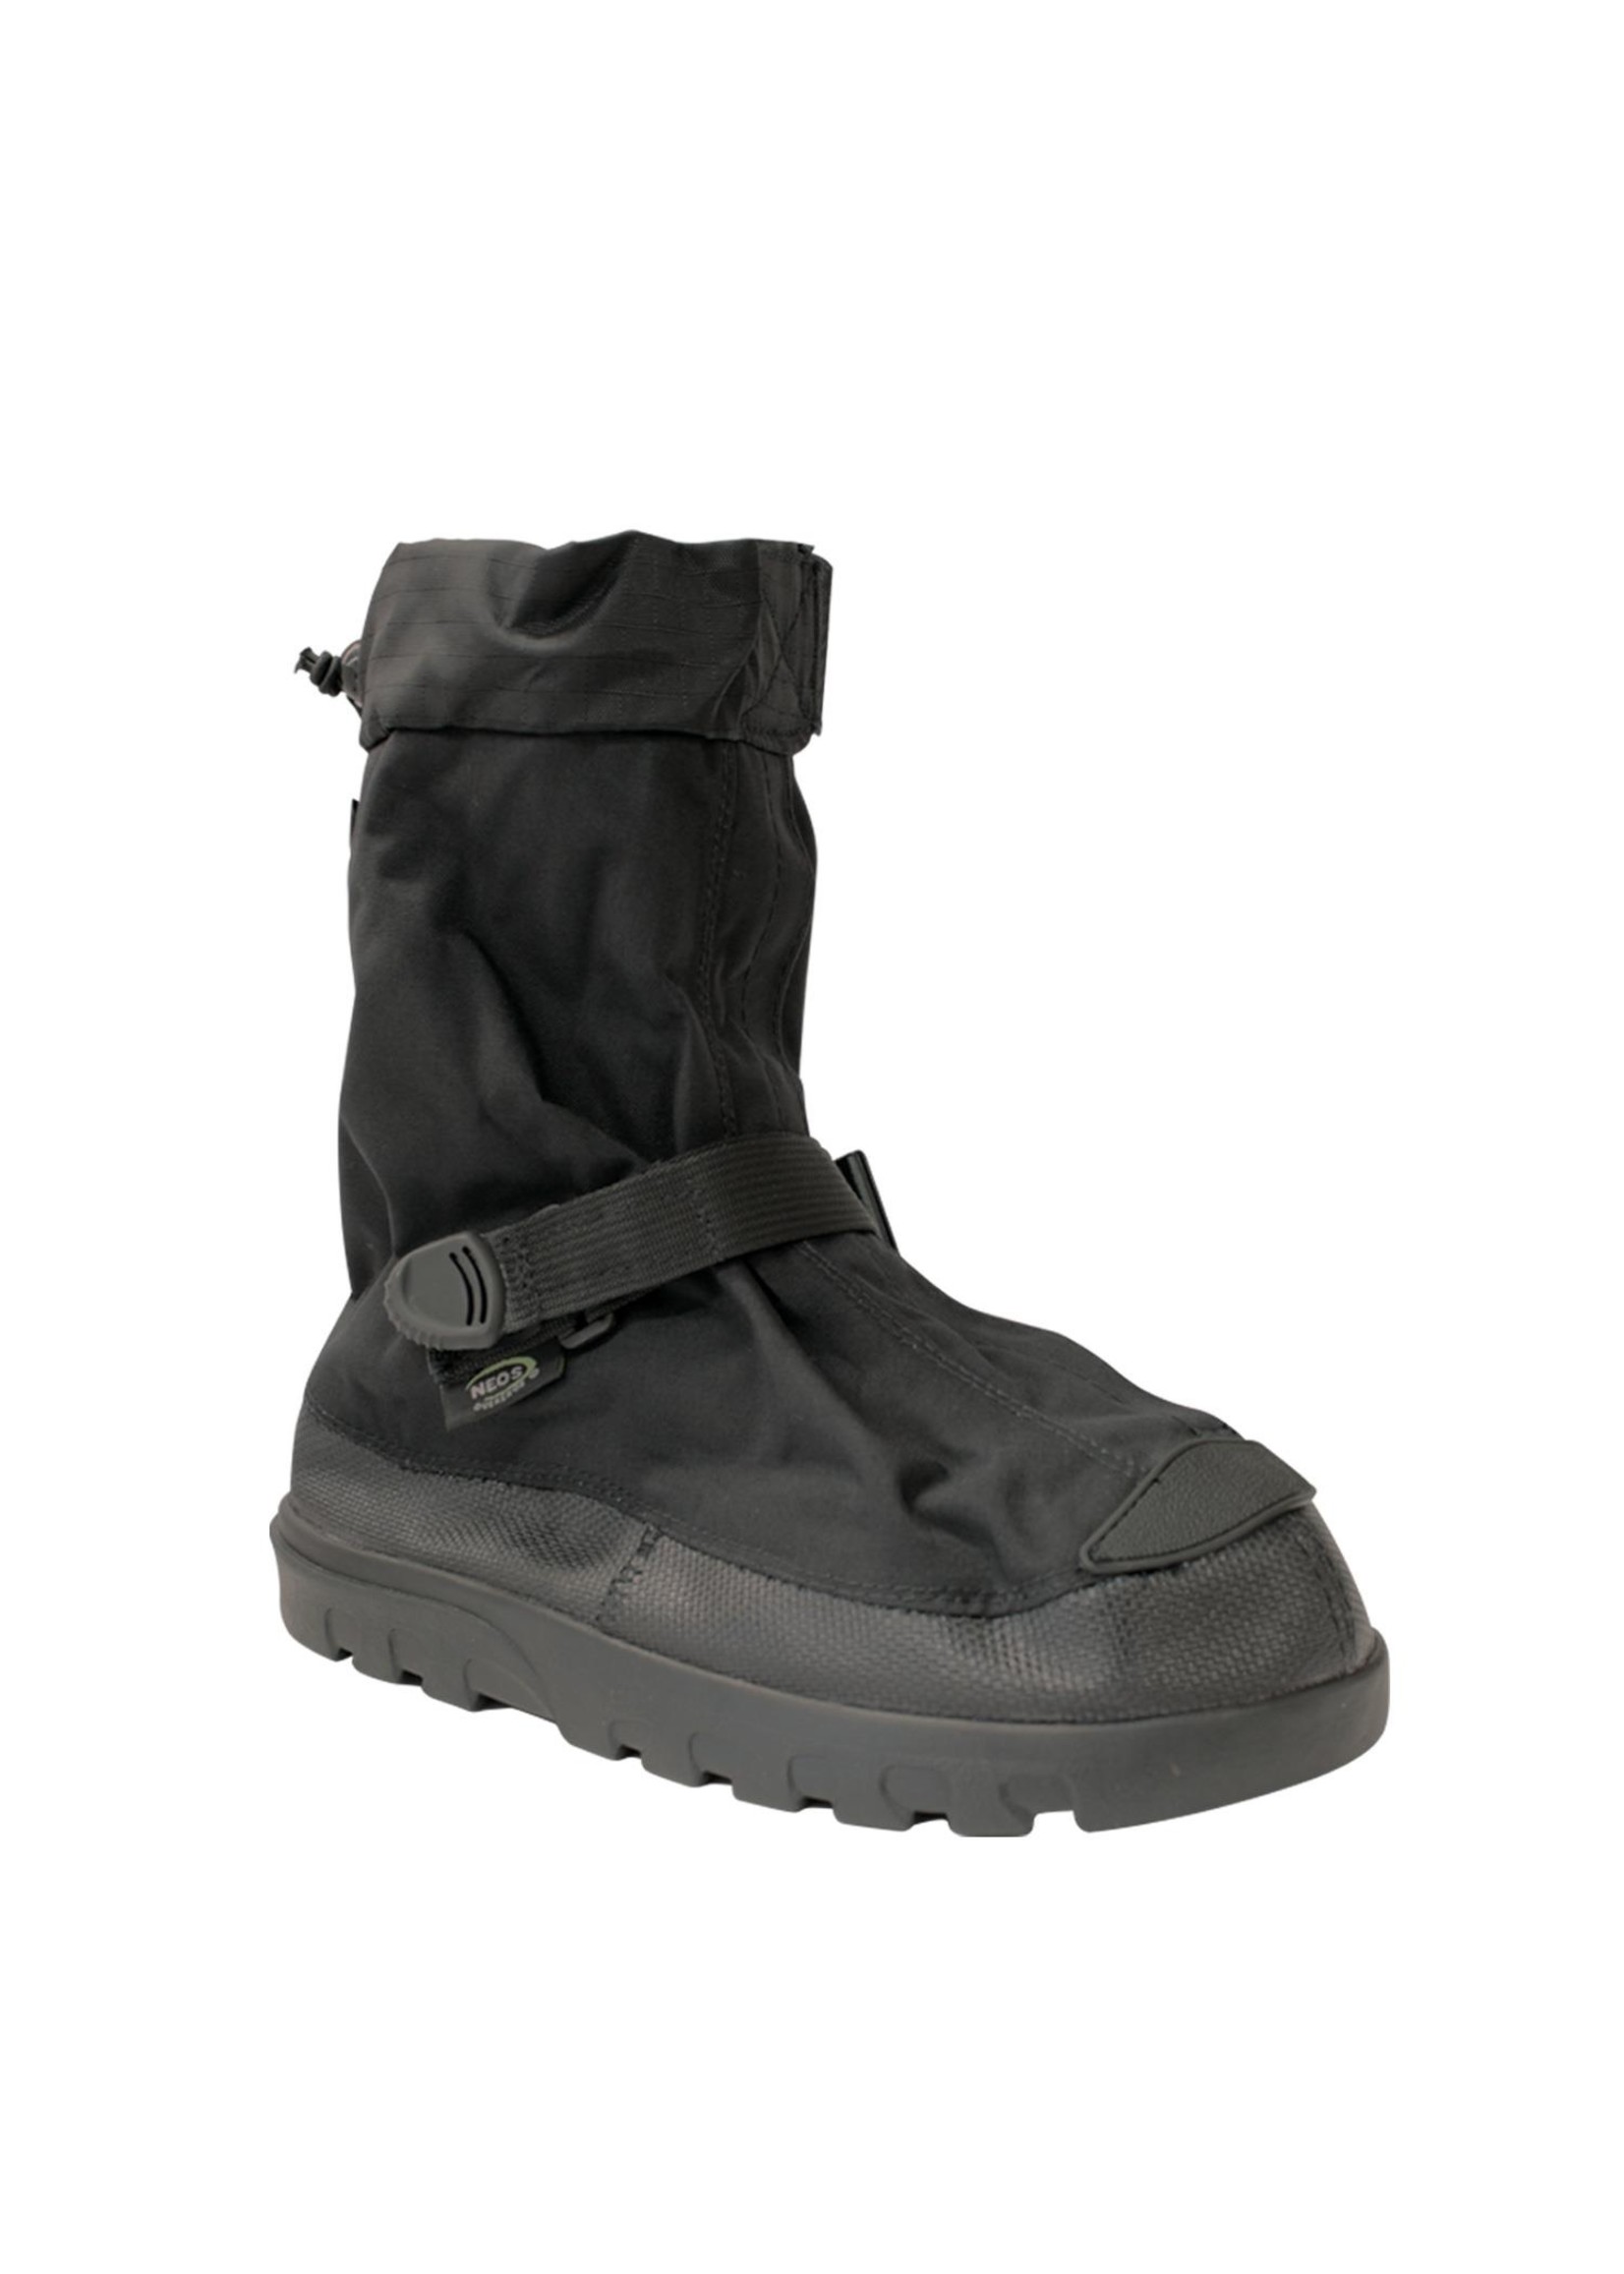 NEOS Couvre-bottes NEOS Voyager